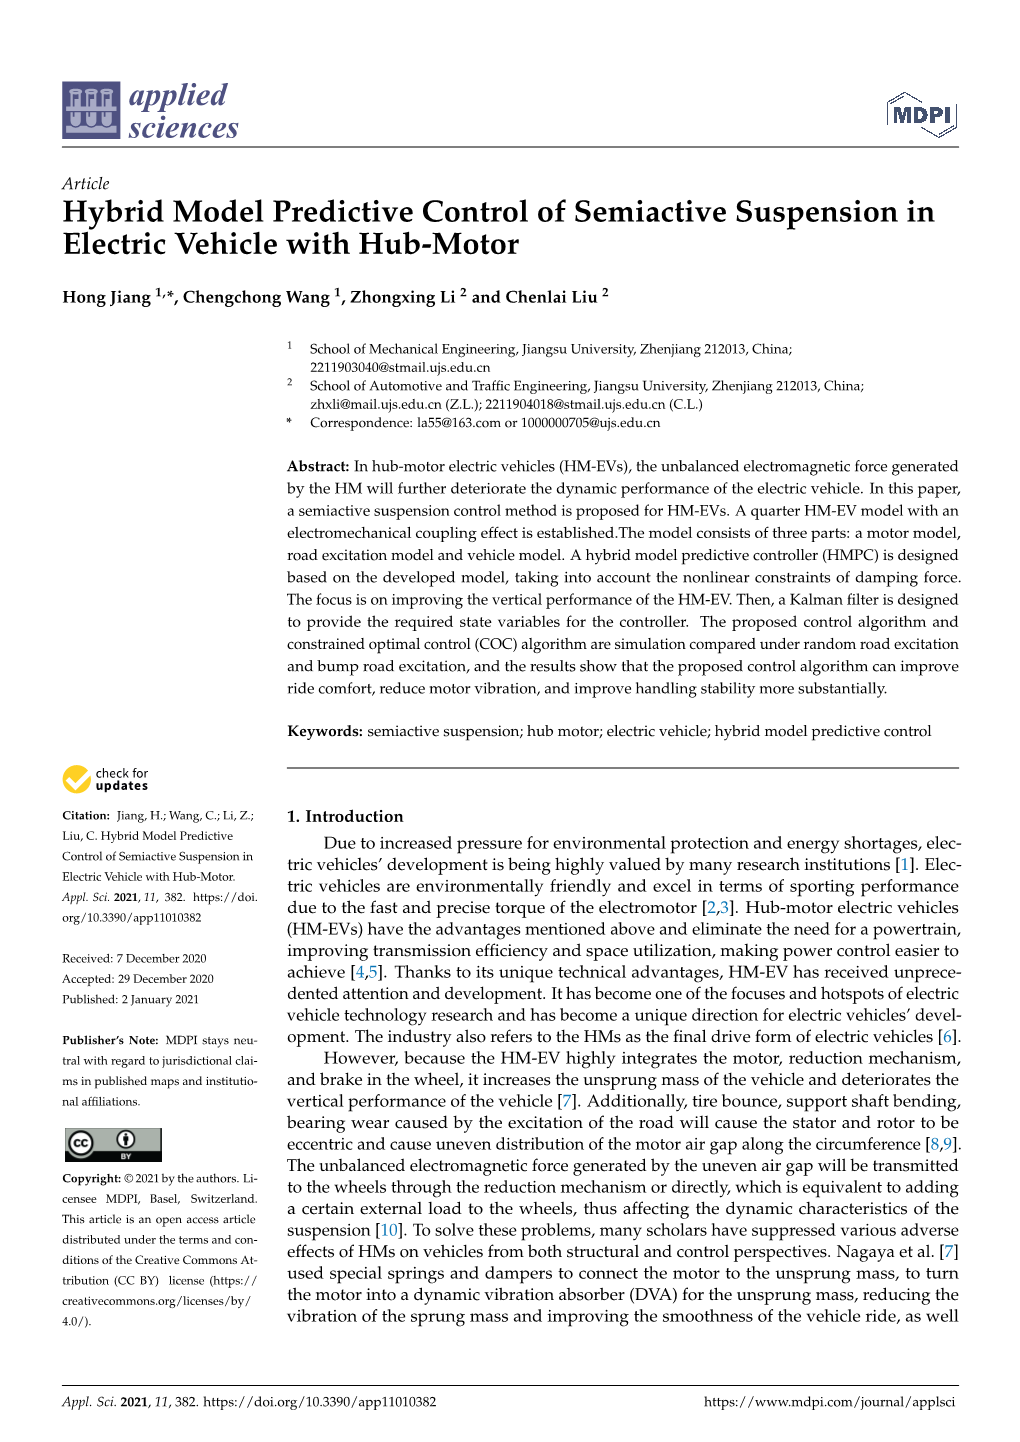 Hybrid Model Predictive Control of Semiactive Suspension in Electric Vehicle with Hub-Motor